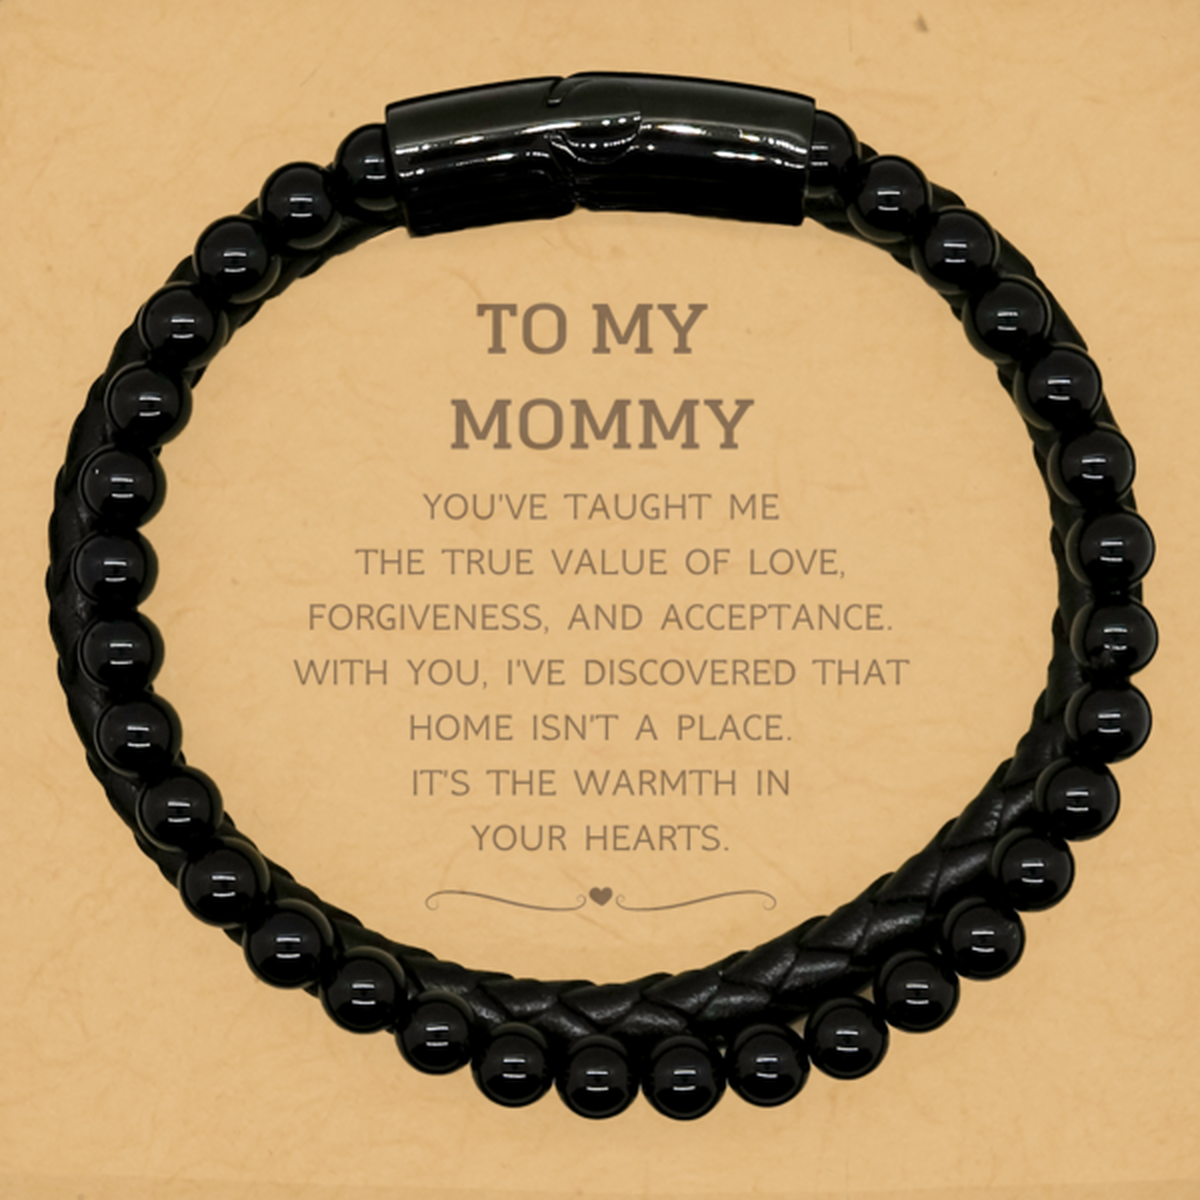 To My Mommy Gifts, You've taught me the true value of love, Thank You Gifts For Mommy, Birthday Stone Leather Bracelets For Mommy